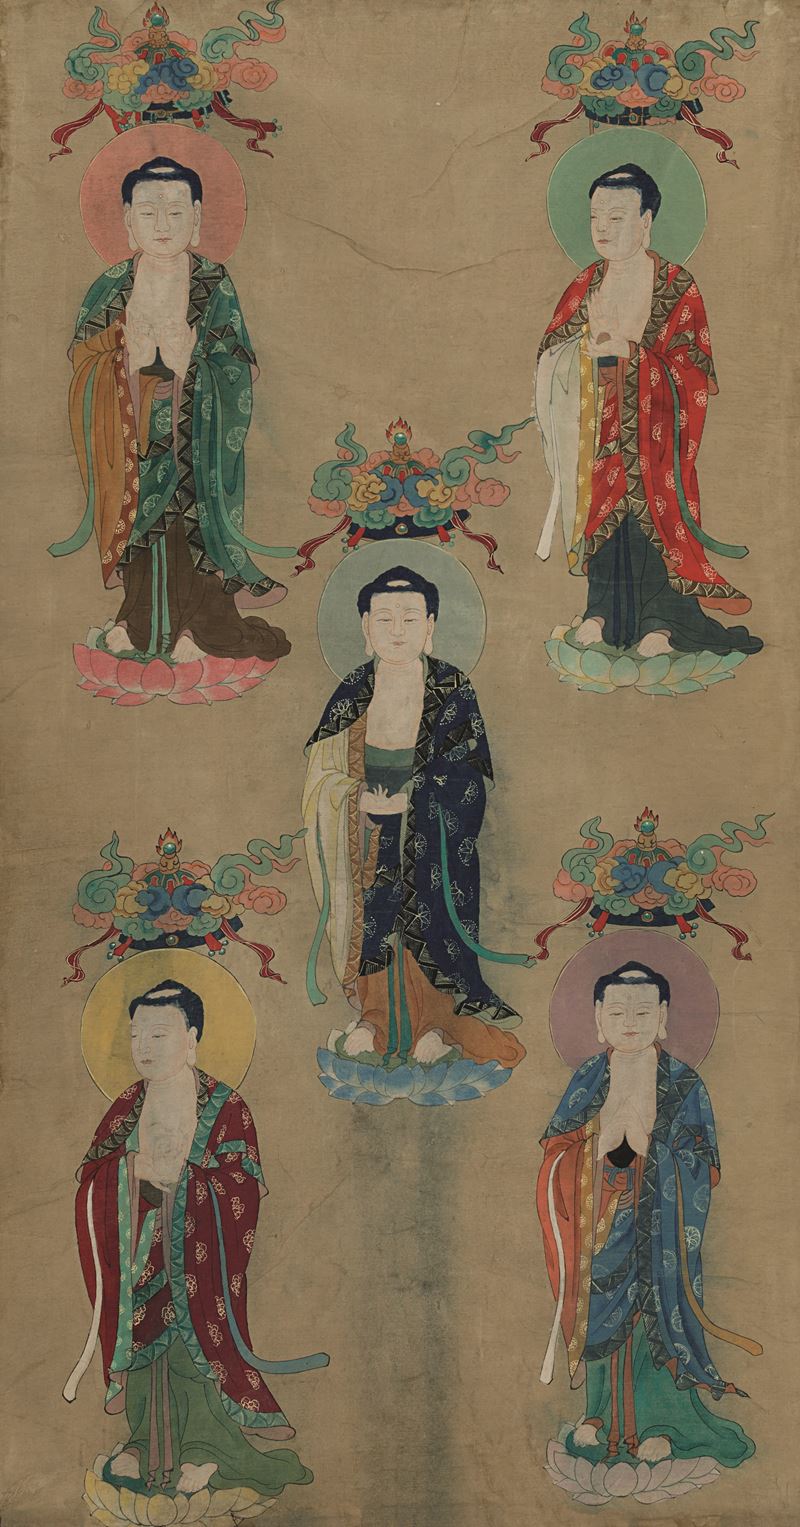 A large painting on silk, China, 1700s  - Auction Fine Chinese Works of Art - Cambi Casa d'Aste